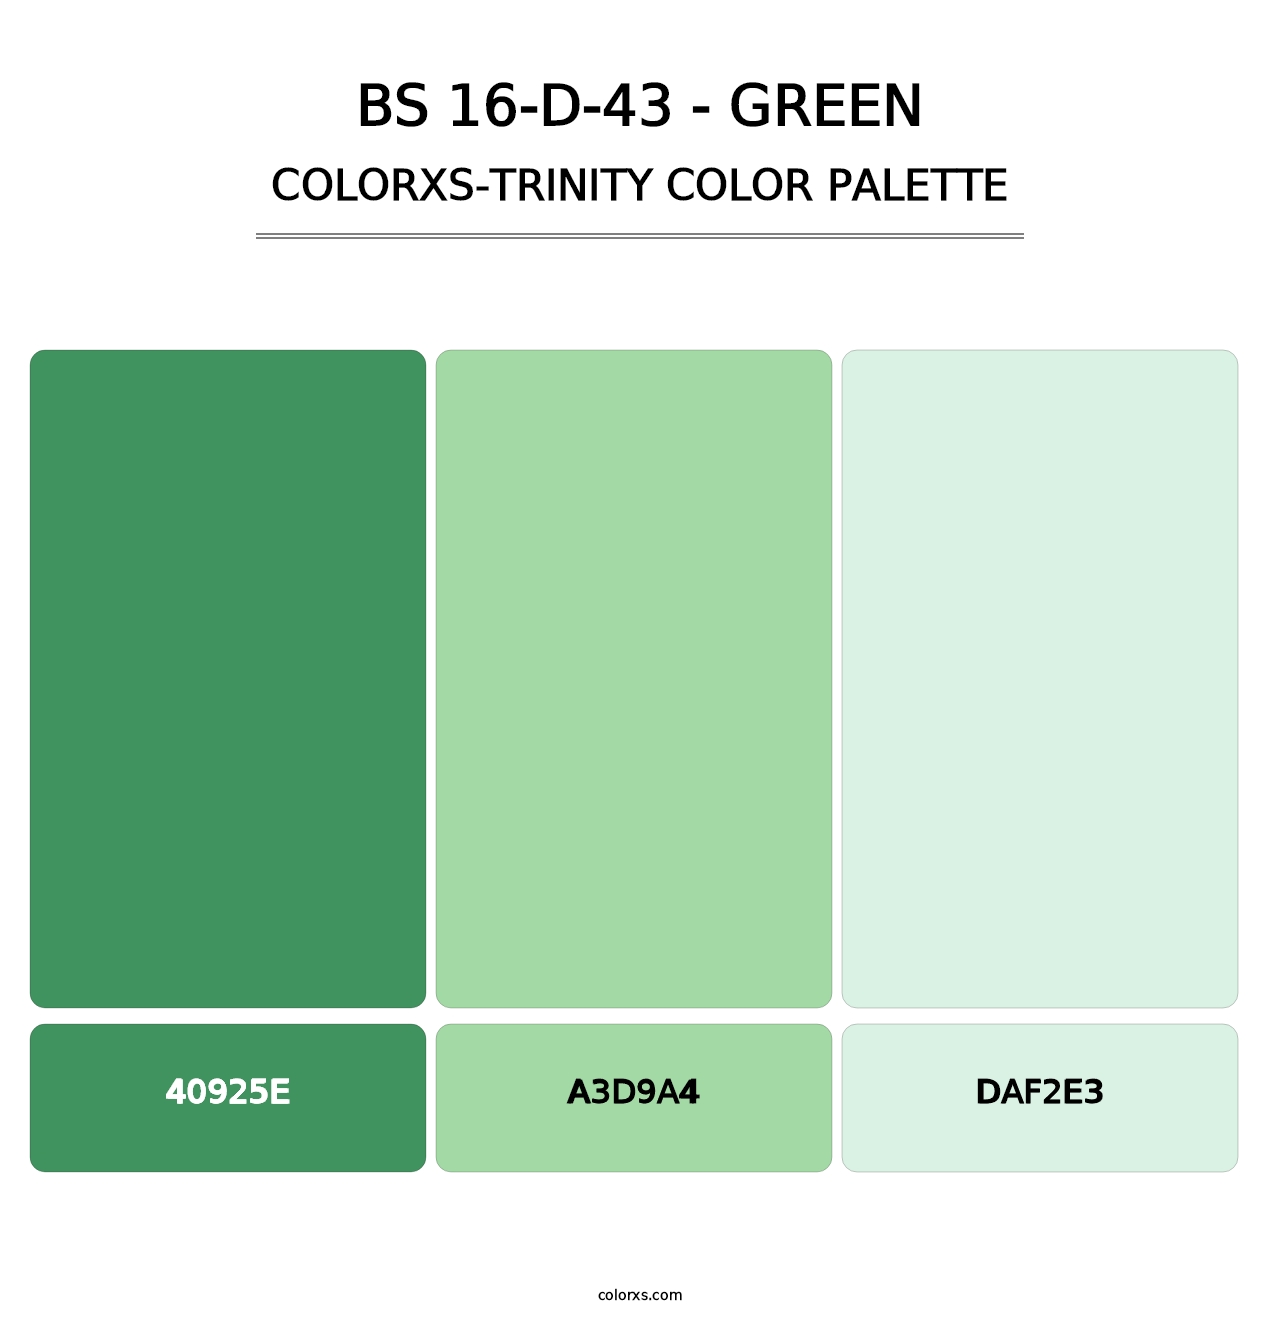 BS 16-D-43 - Green - Colorxs Trinity Palette